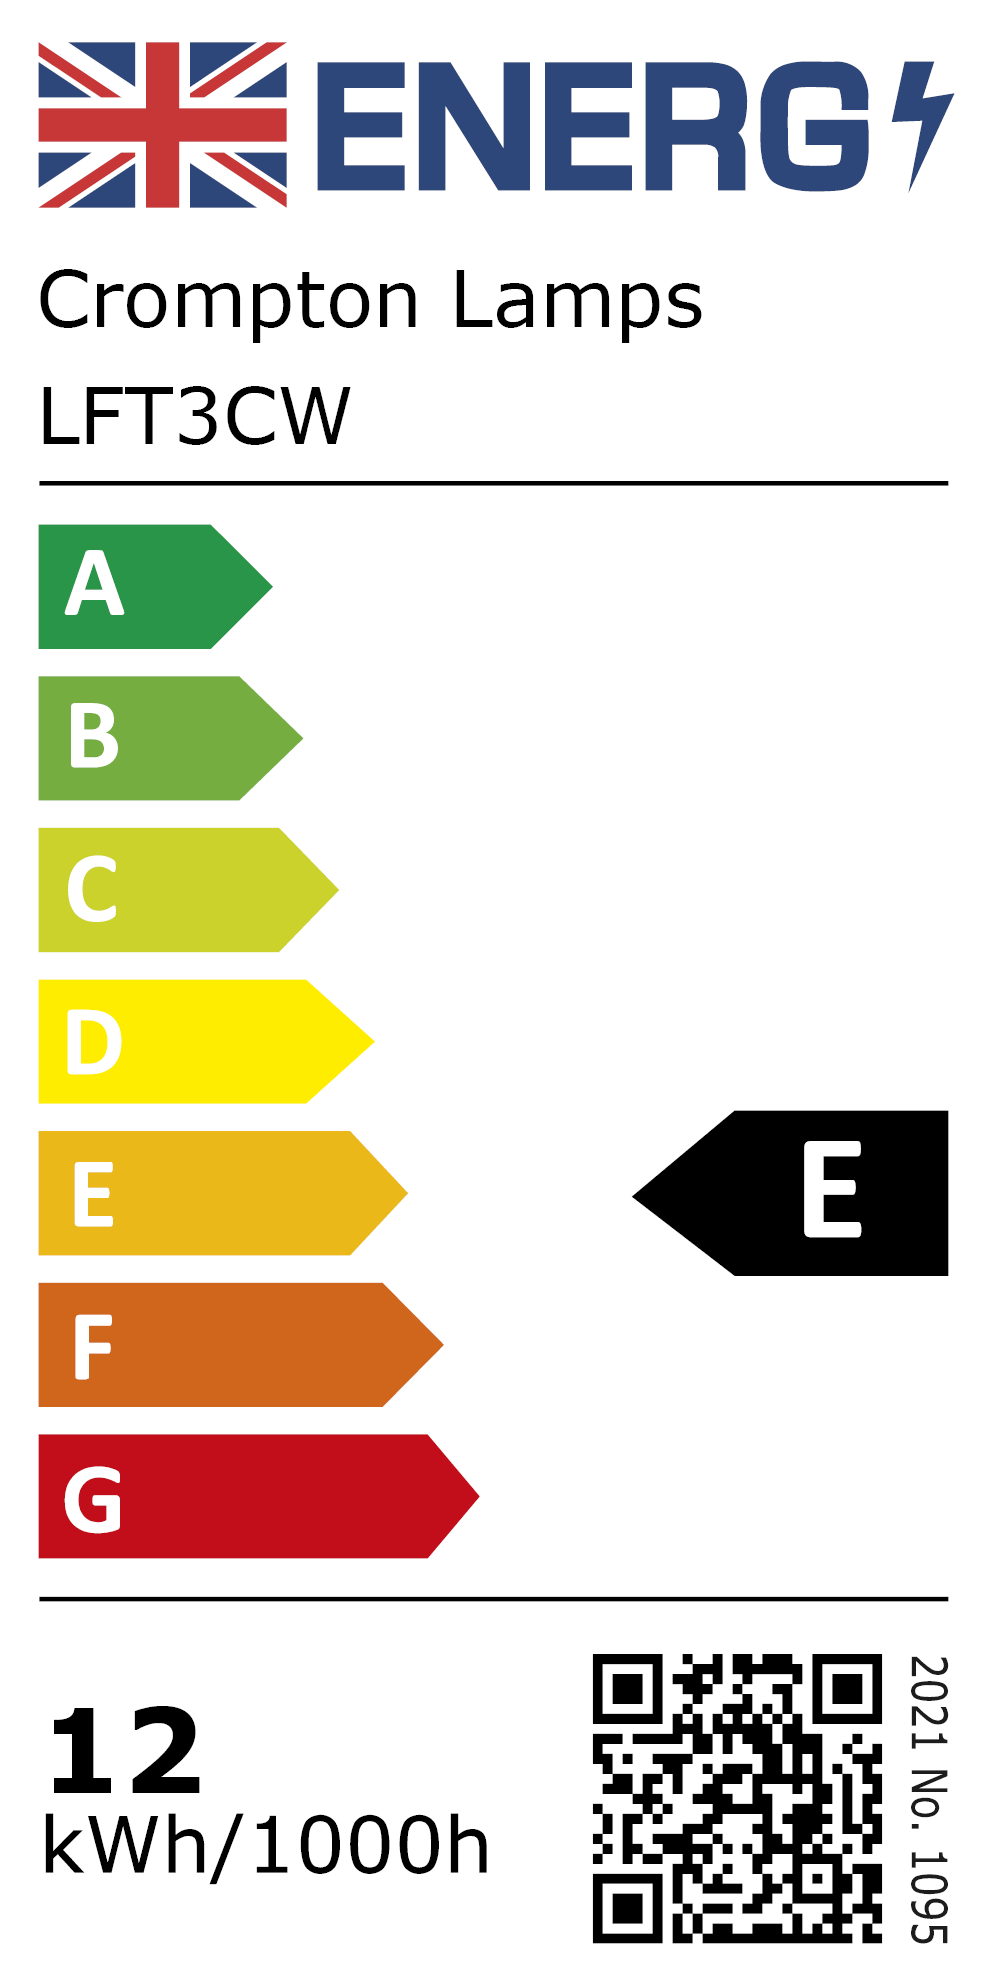 New 2021 Energy Rating Label: Stock Code LFT3CW